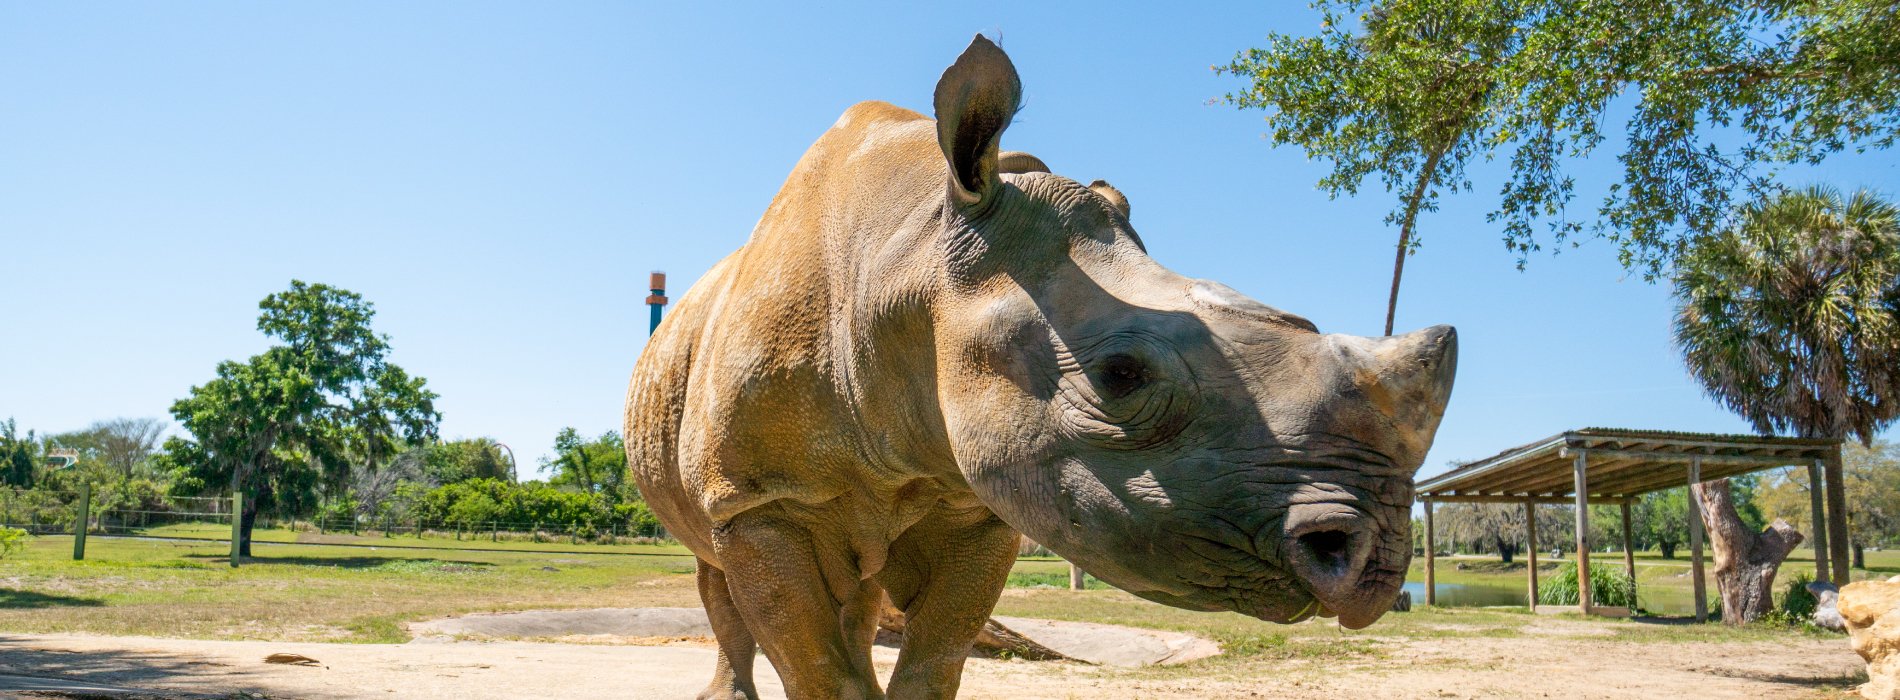 An adult rhino standing outside in the sun